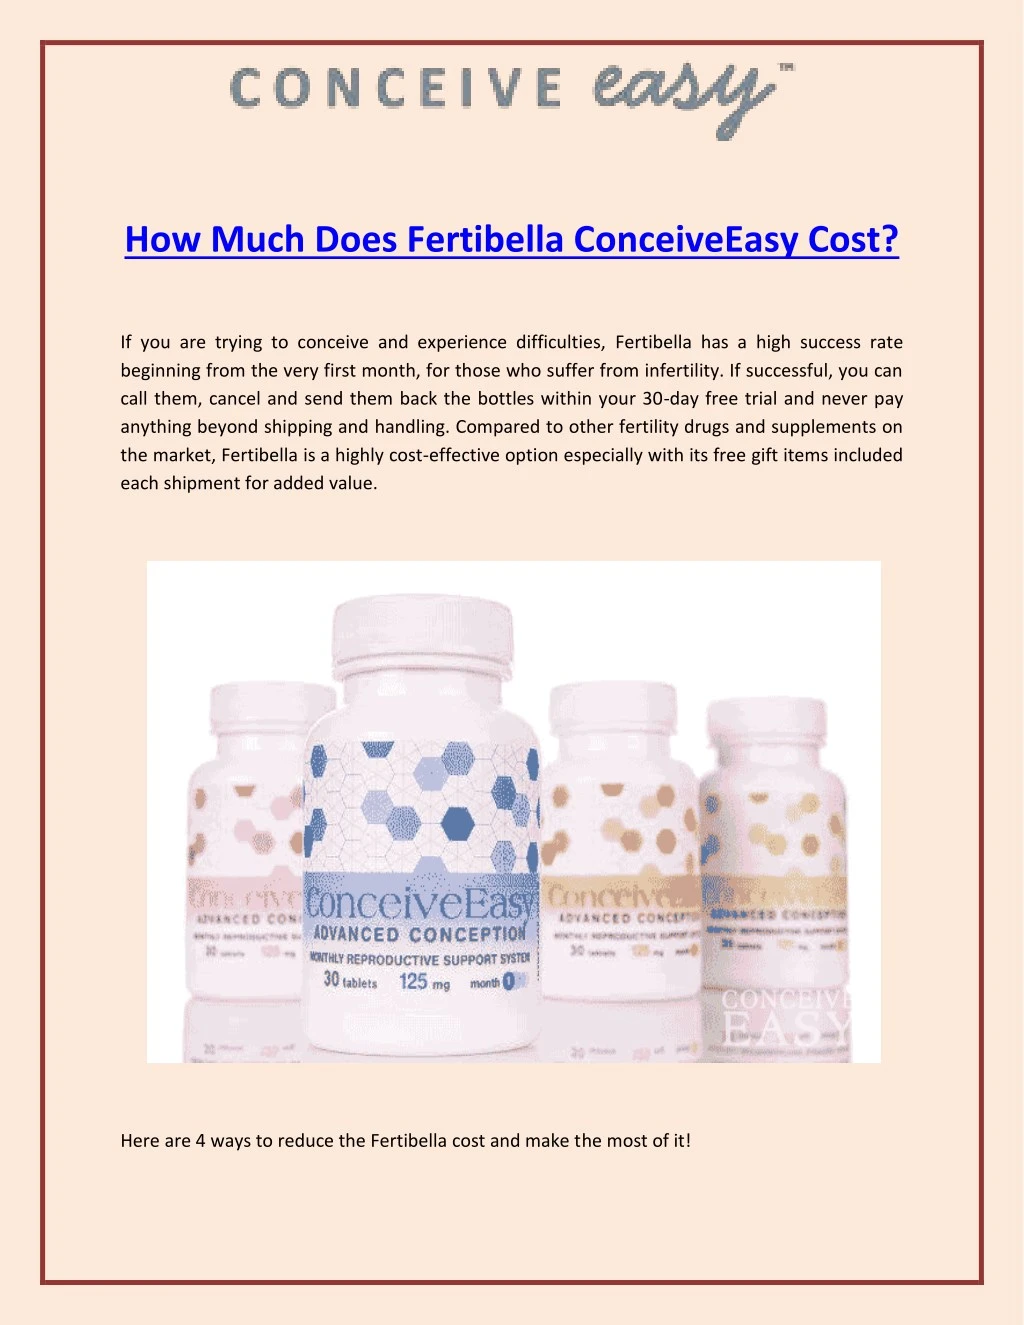 how much does fertibella conceiveeasy cost